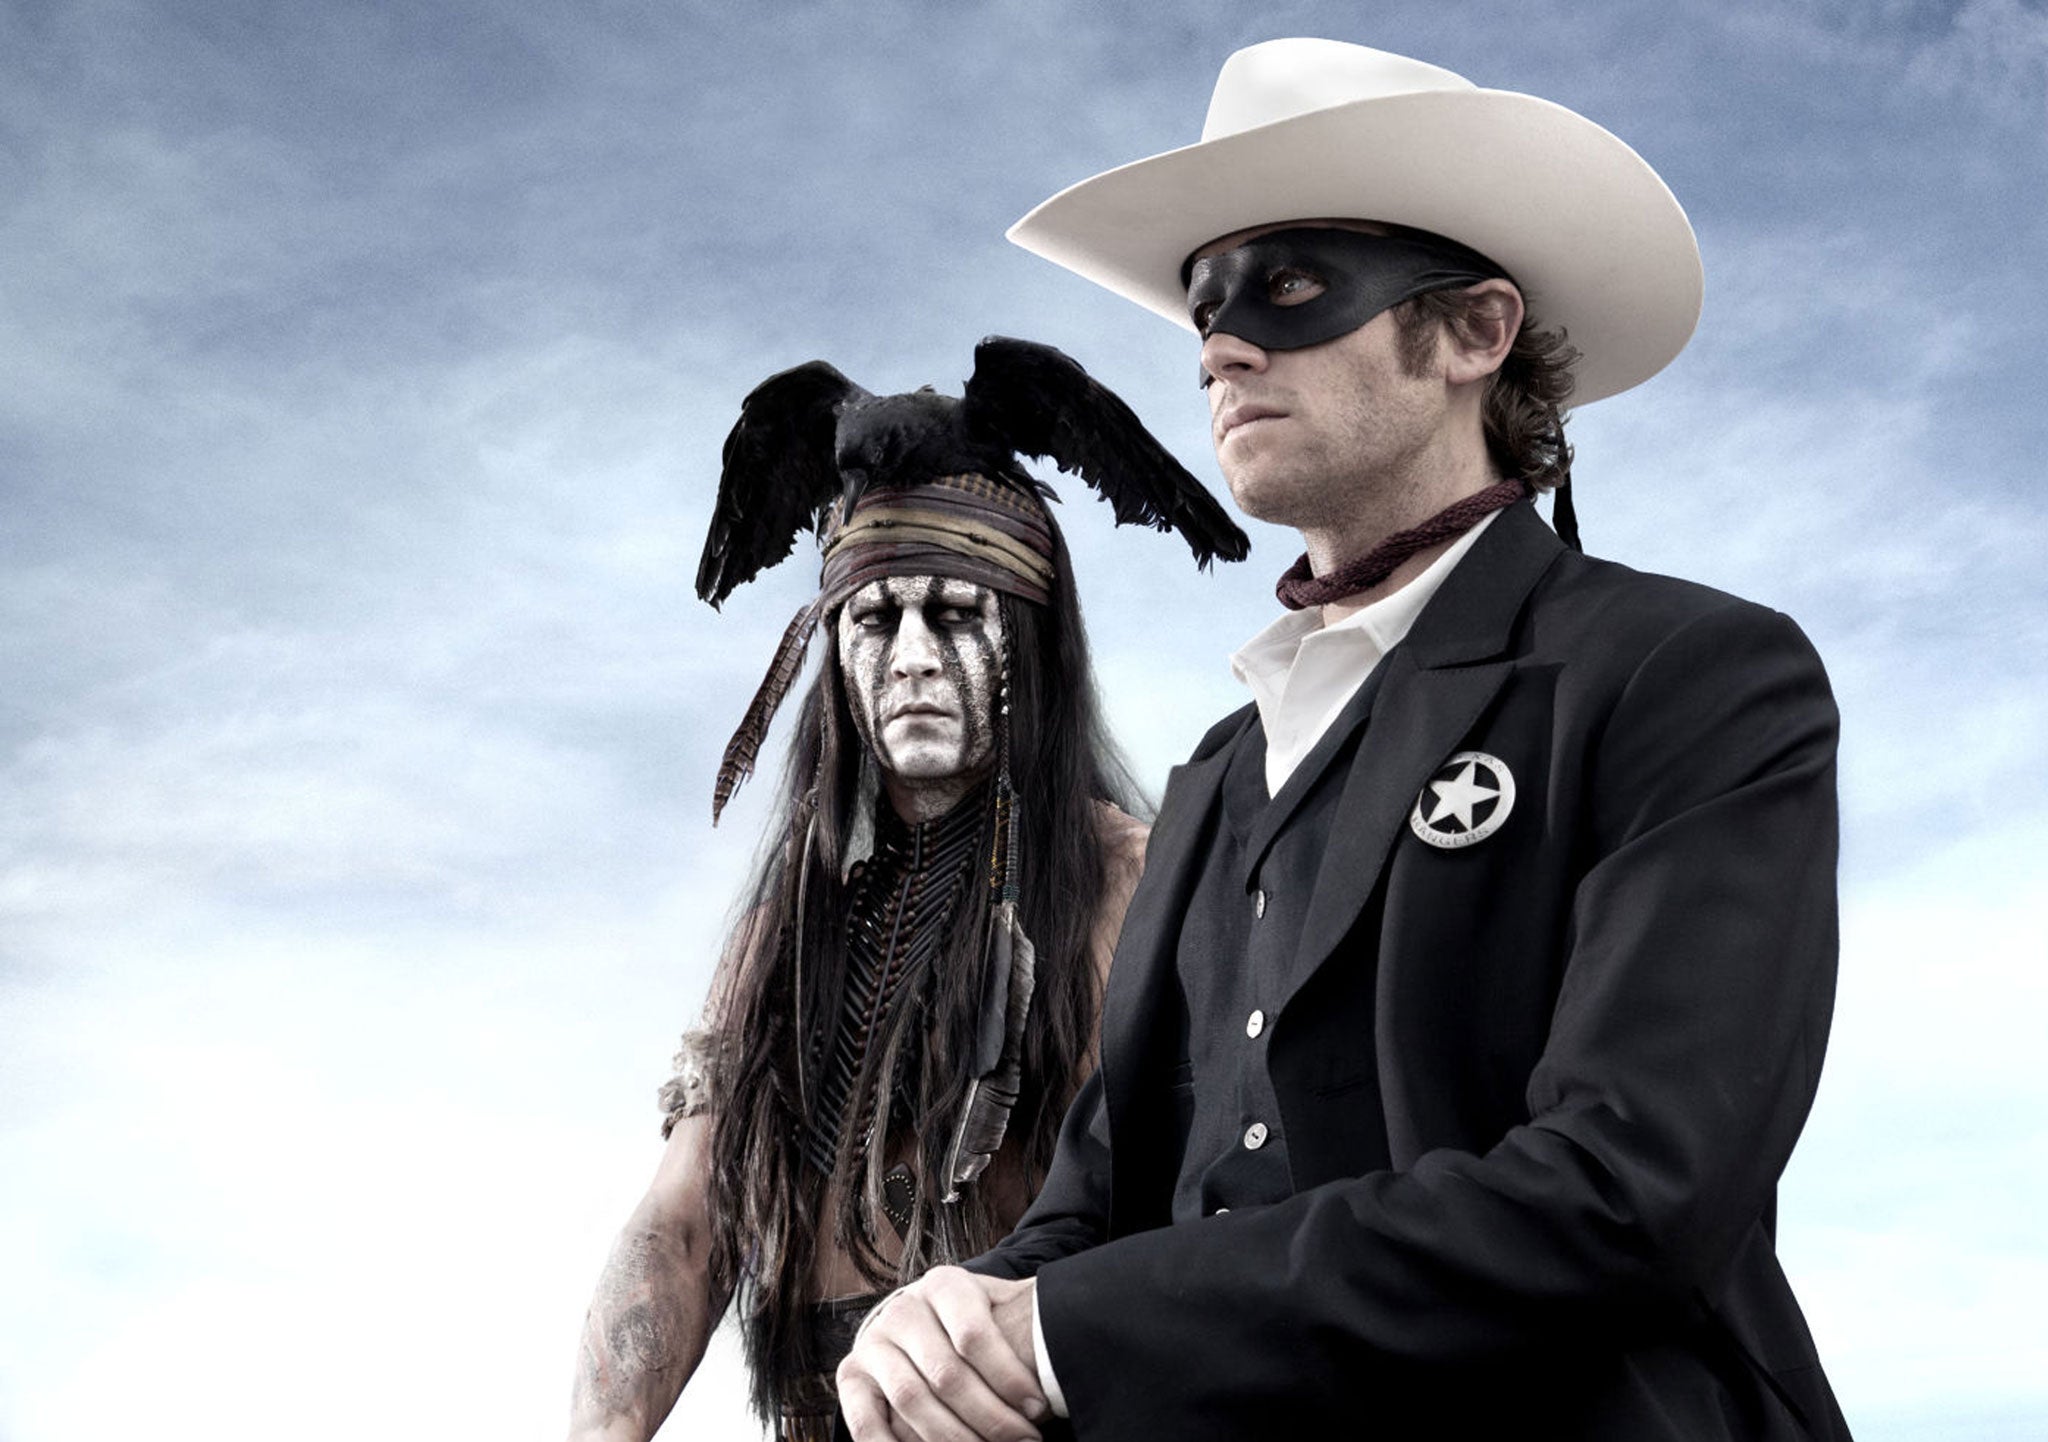 The Lone Ranger performed poorly at the box office